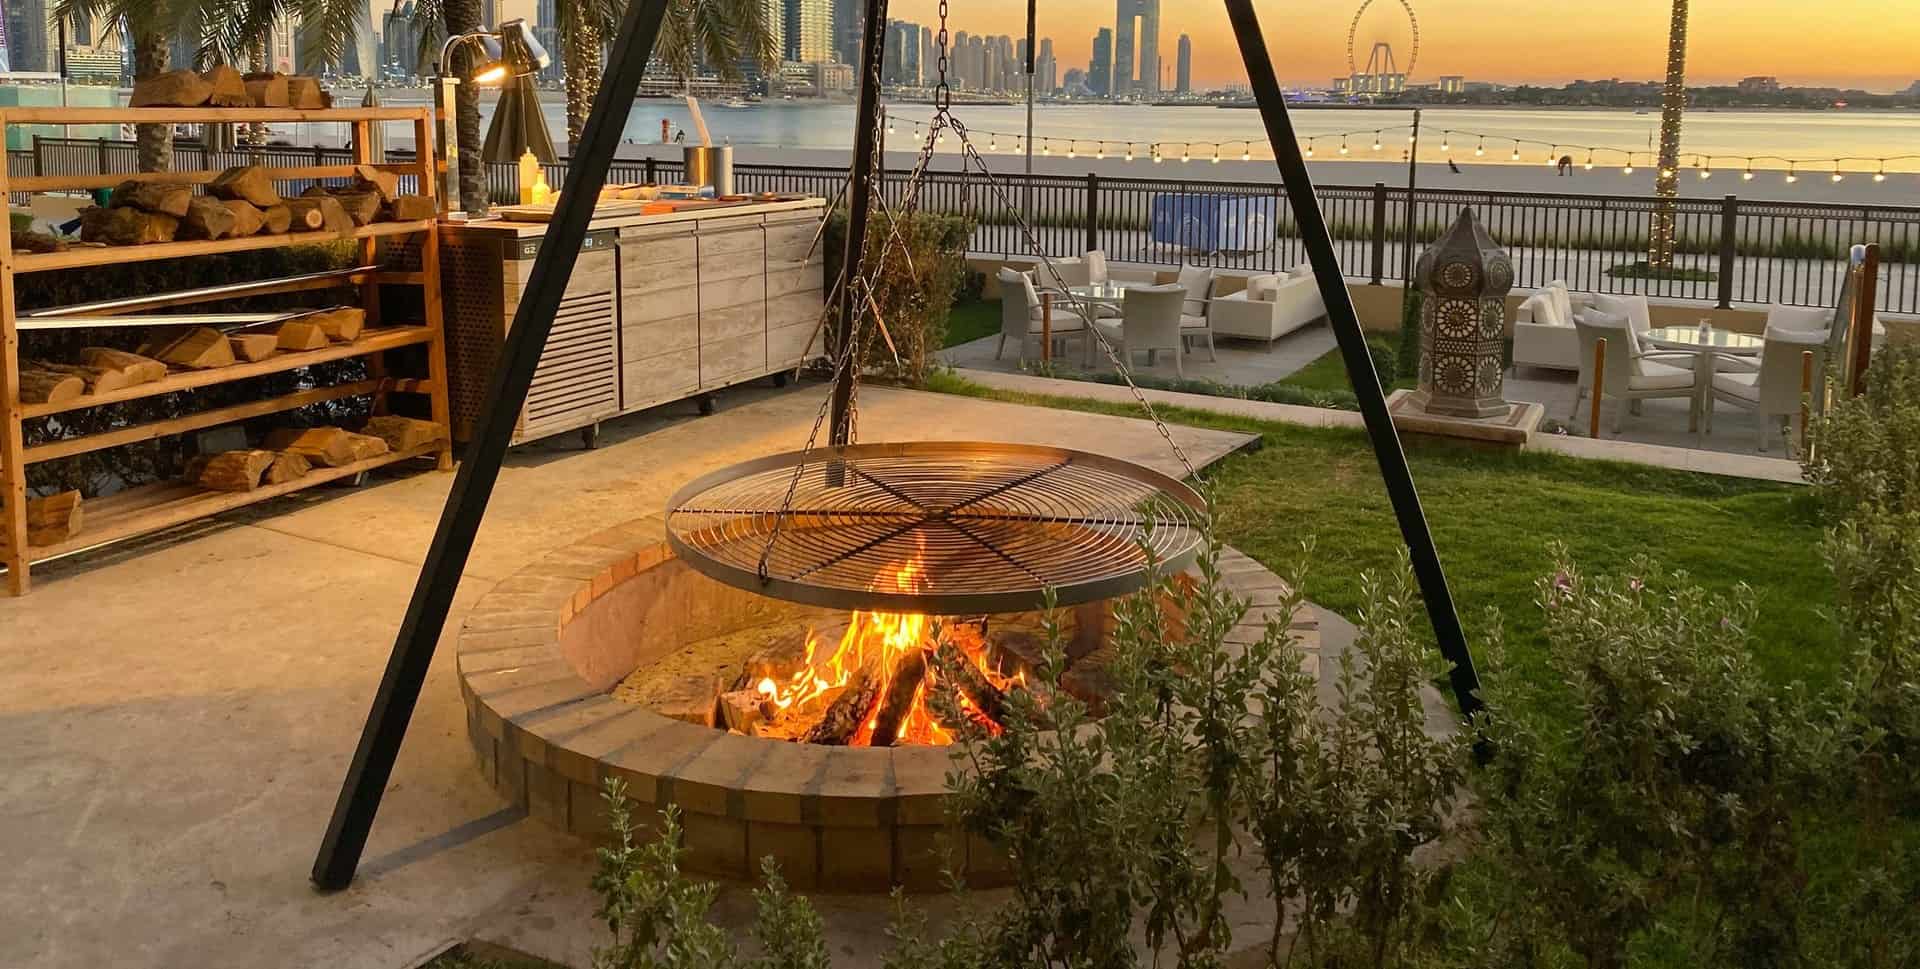 How To Keep Fire Going In Fire Pit